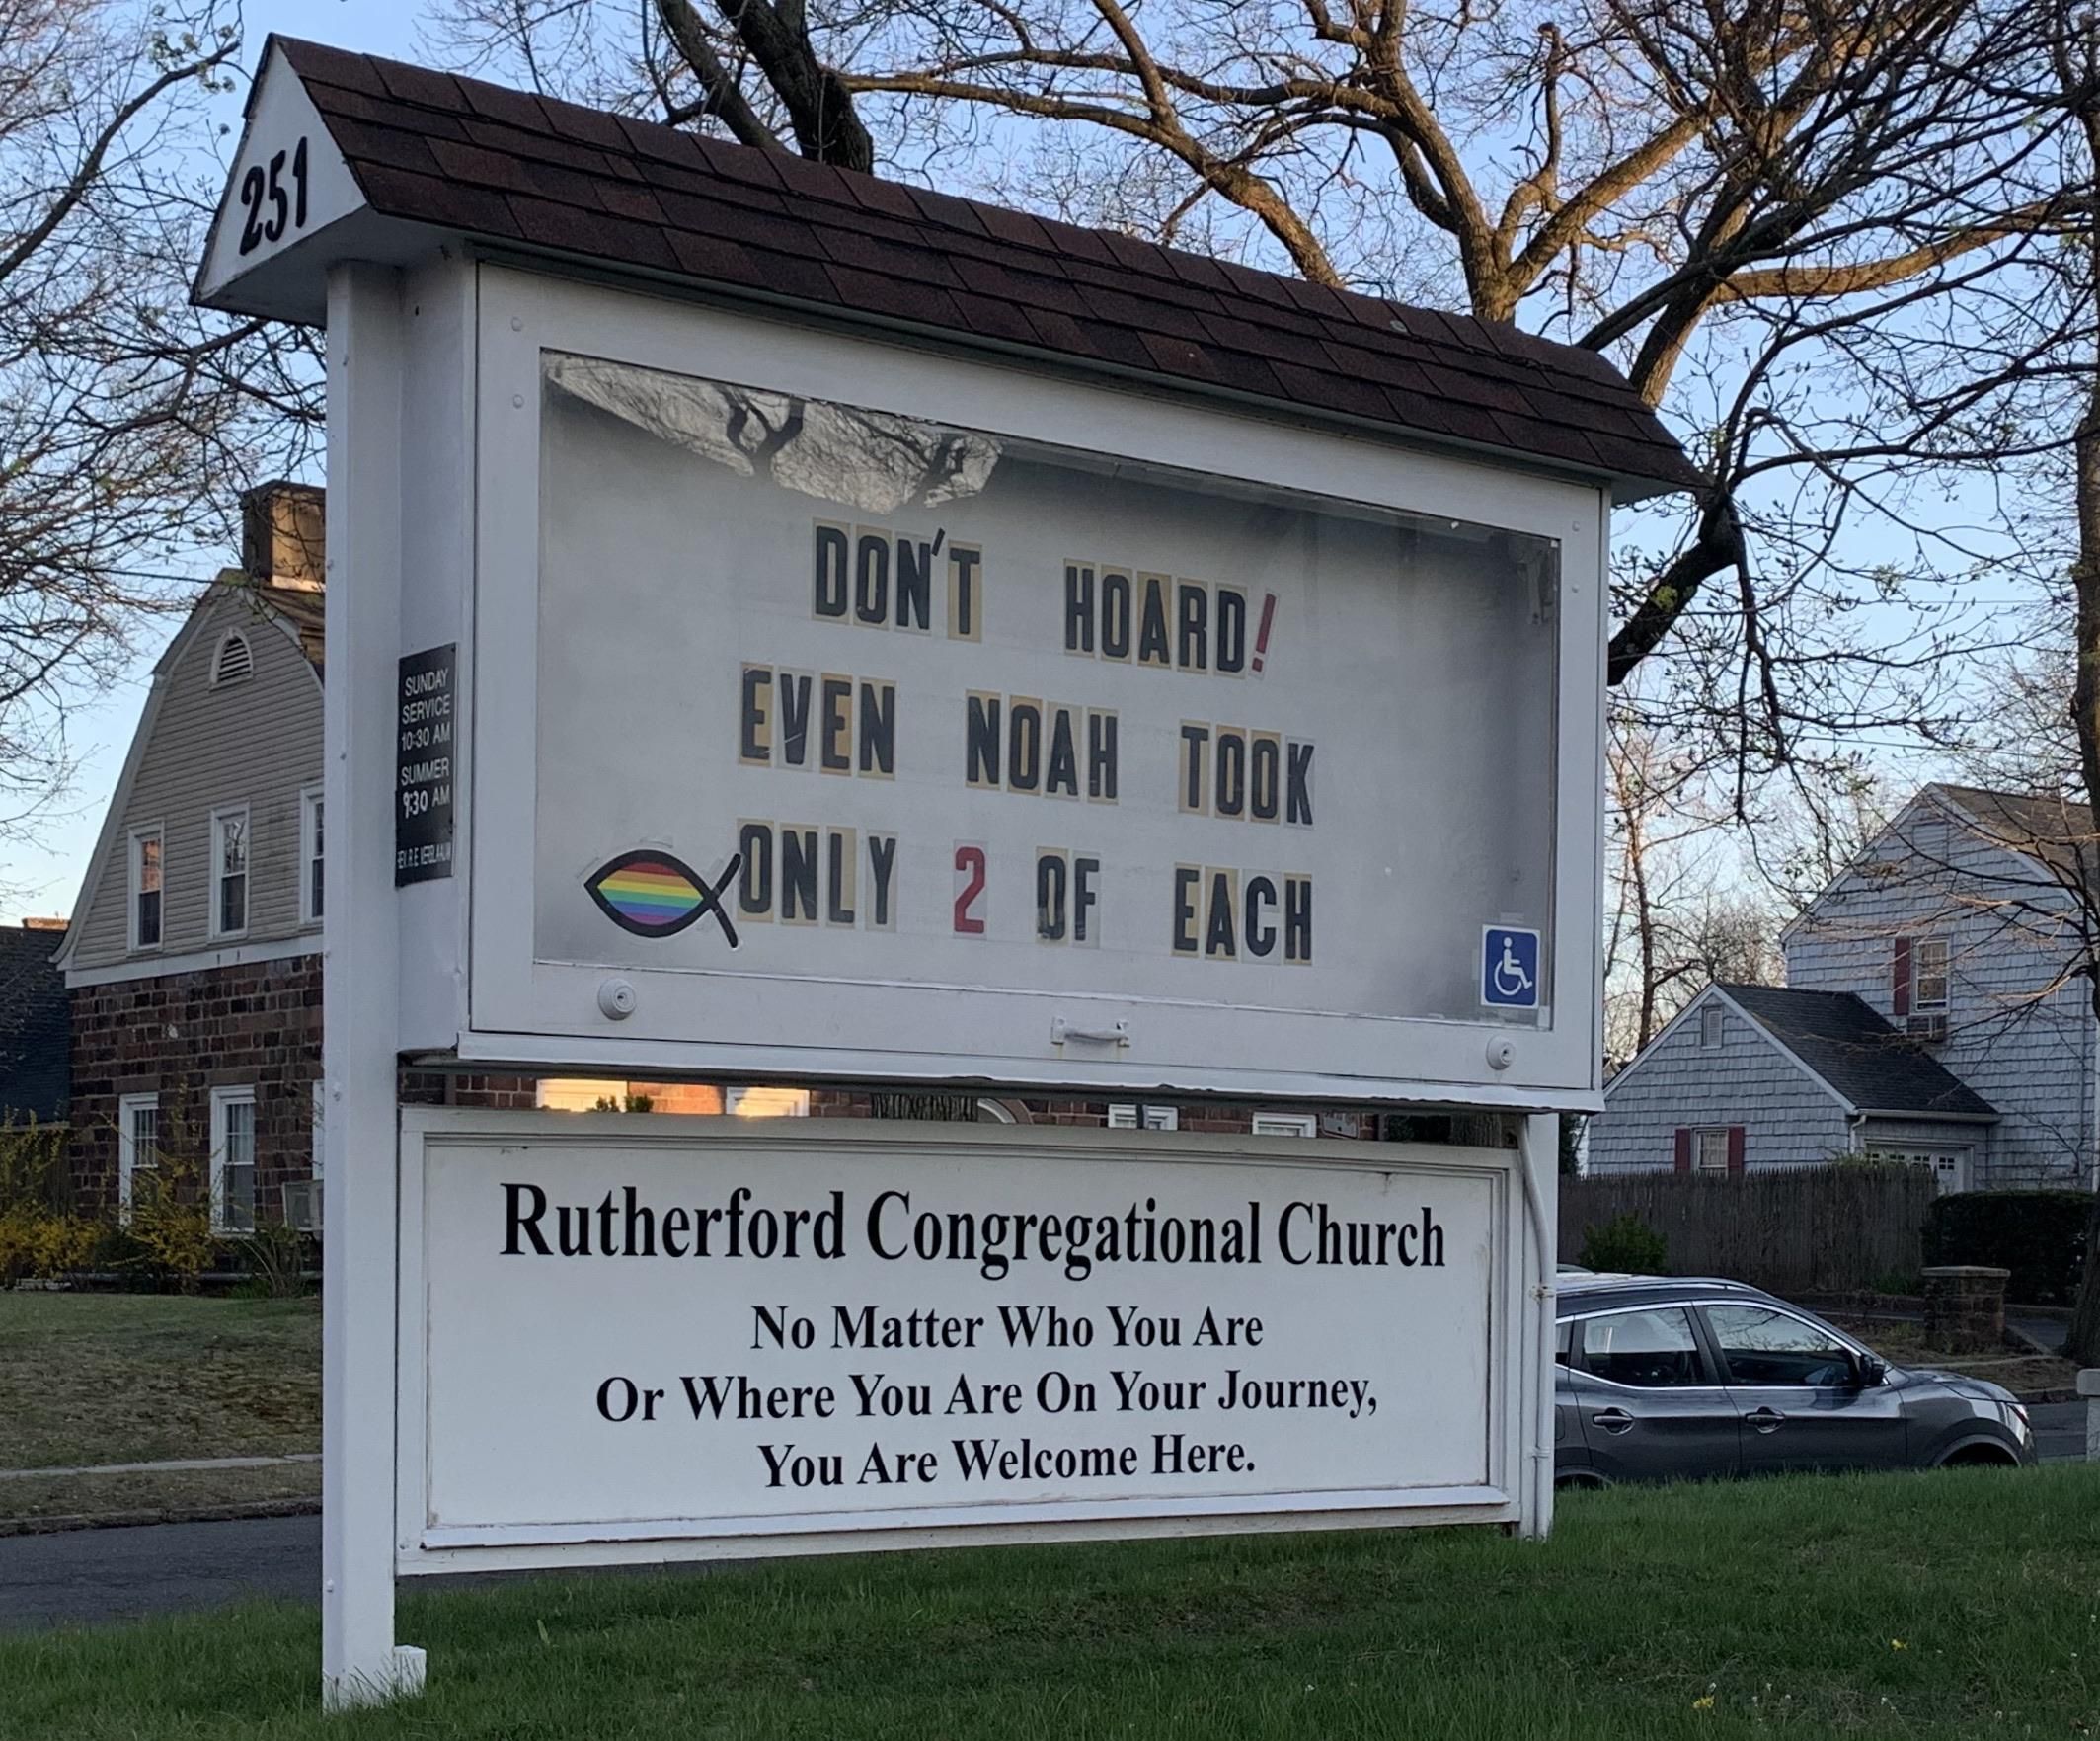 The church in my town is always posting fantastic signs